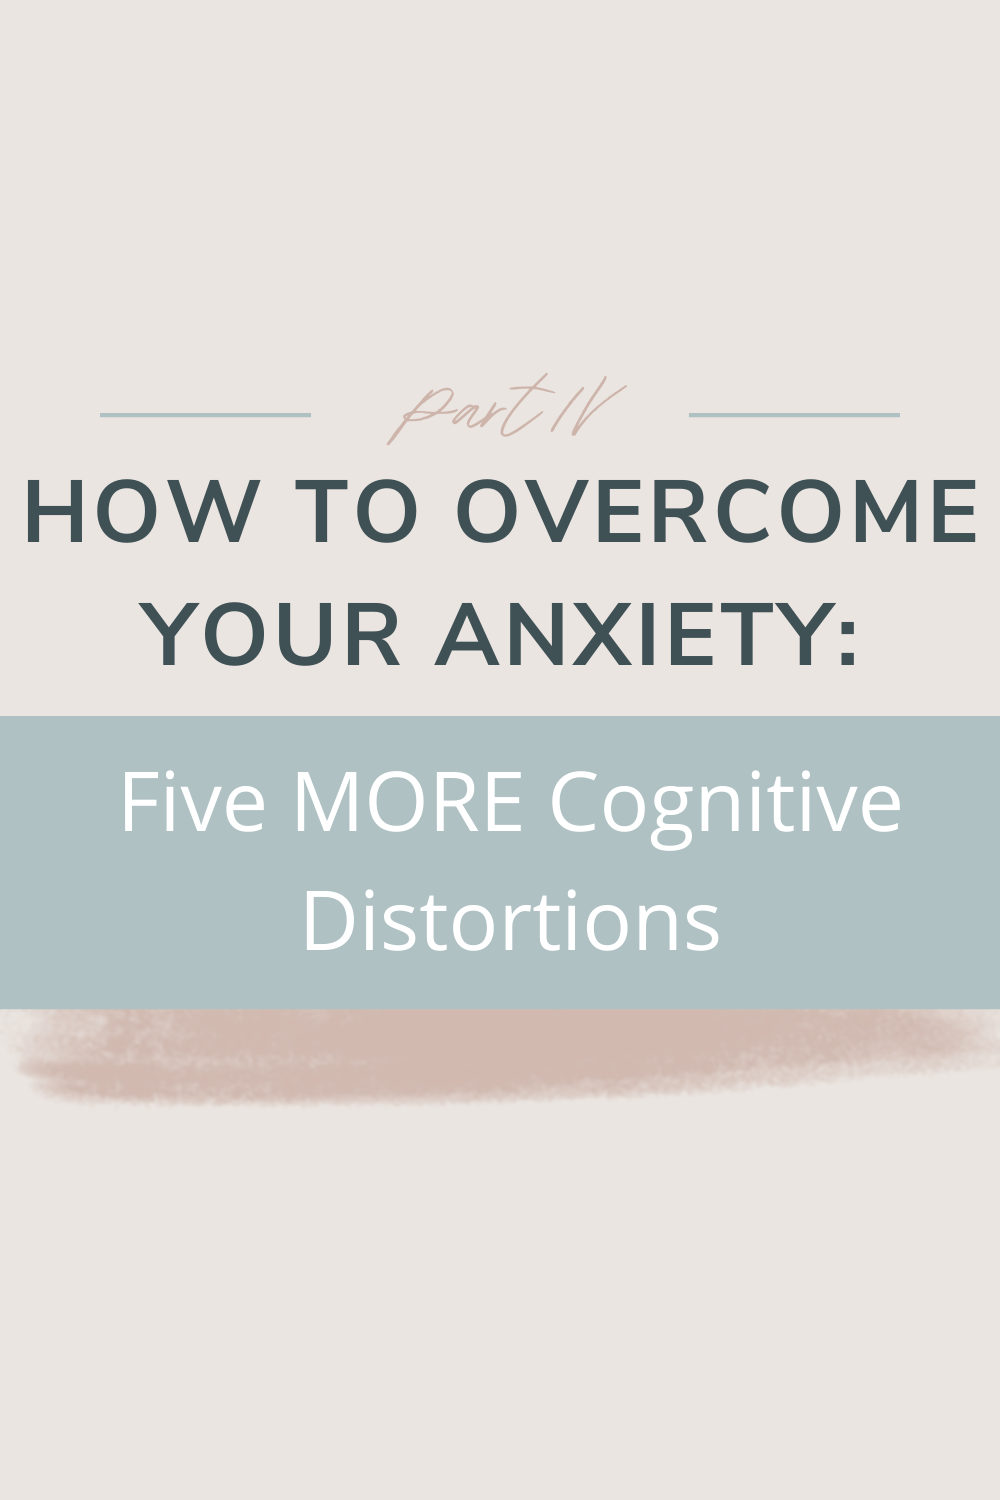 How to Overcome Your Anxiety: Five MORE Cognitive Distortions | This blog post dives into five more cognitive distortions - what they are and how they show up in your own life. Part IV in a series about overcoming anxiety and learning to be mindful and work with your thought distortions, cheers!